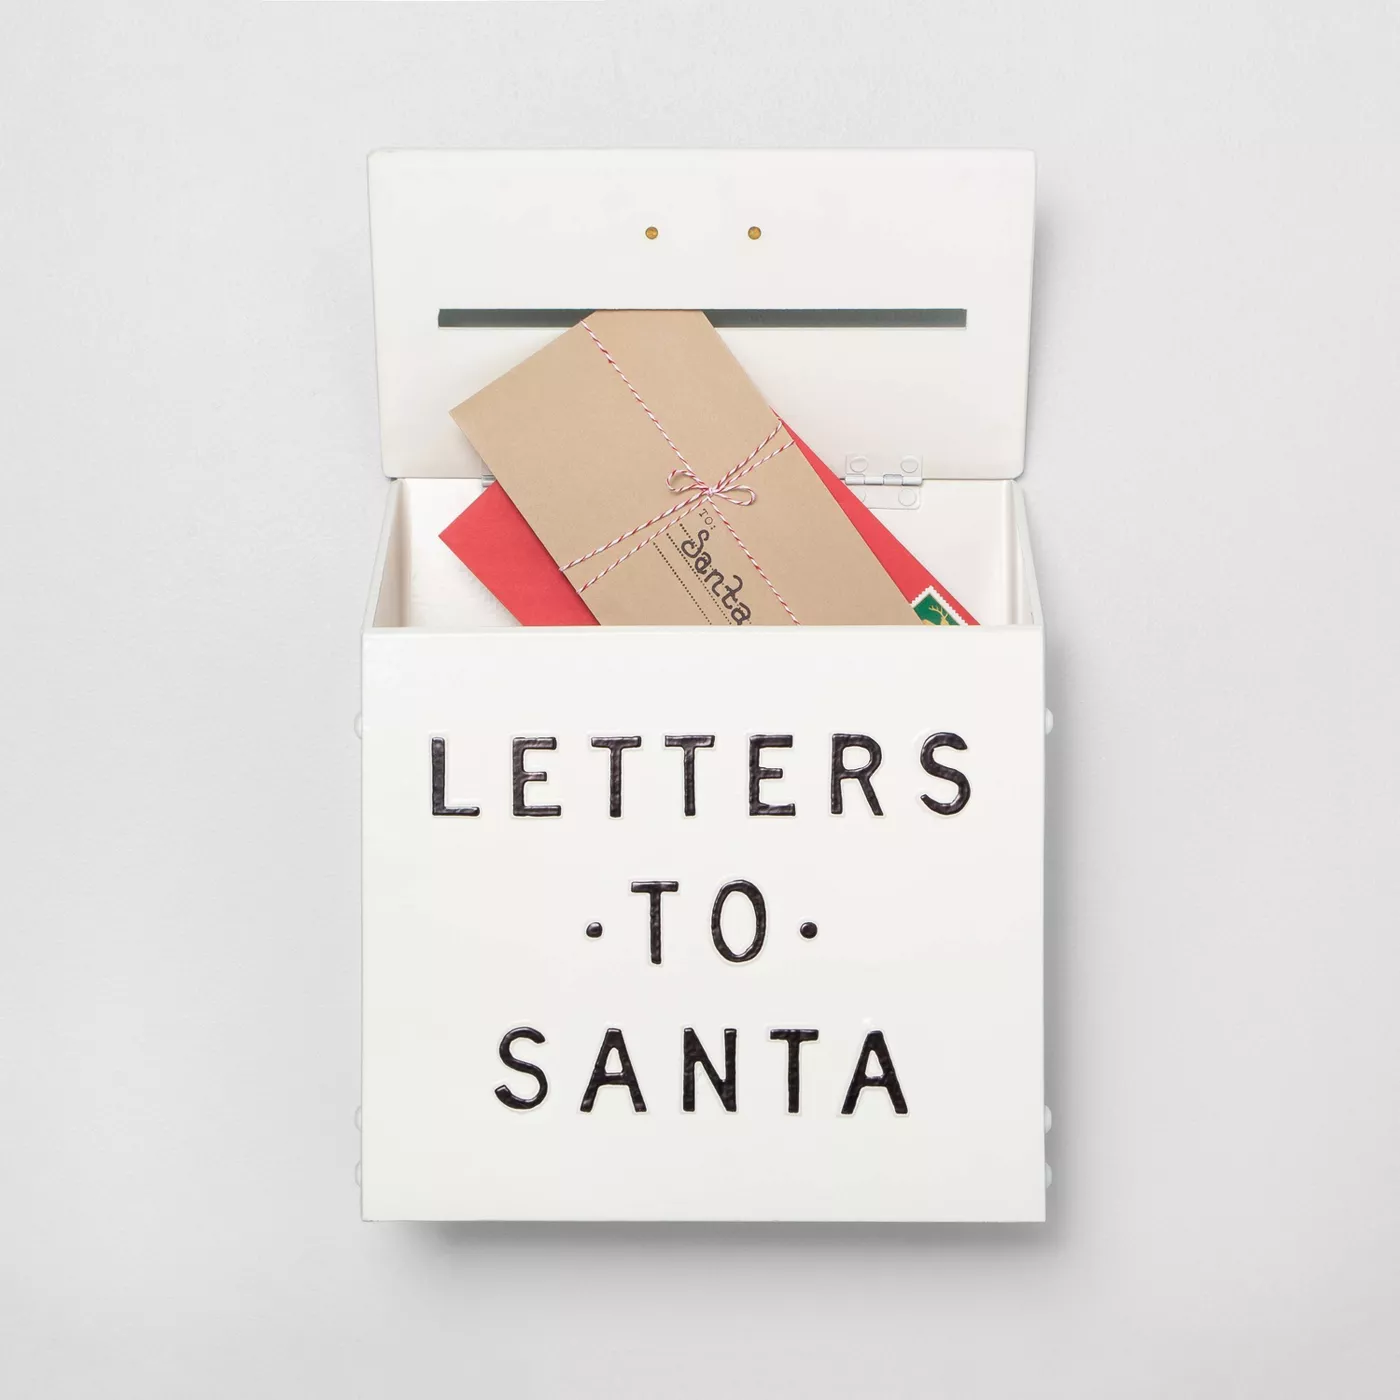 Letters to Santa Mailbox Sour Cream - Hearth & Hand™ with Magnolia - image 2 of 4